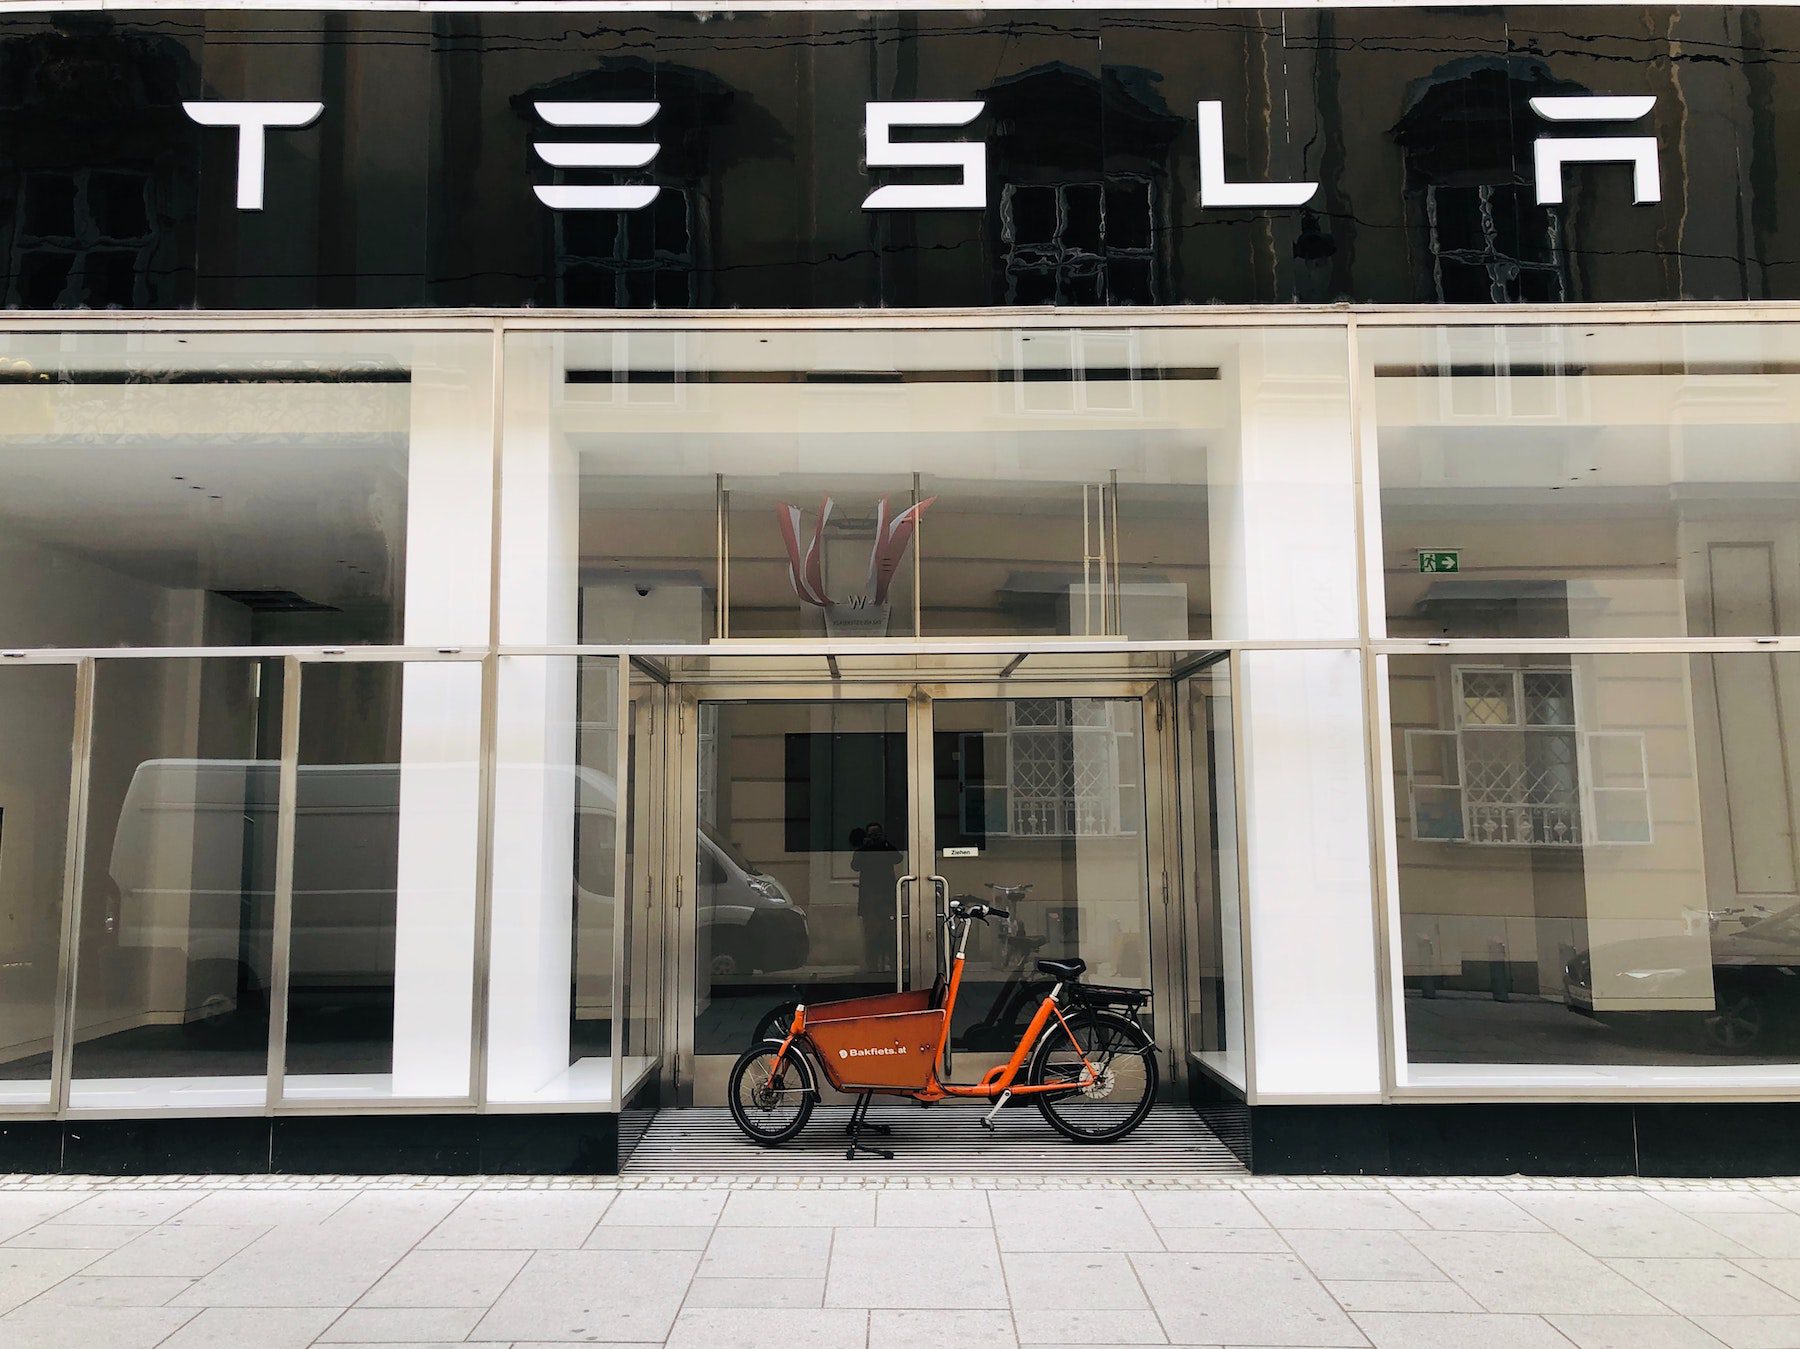 Tesla storefront with a historic antique style vehicle displayed in front